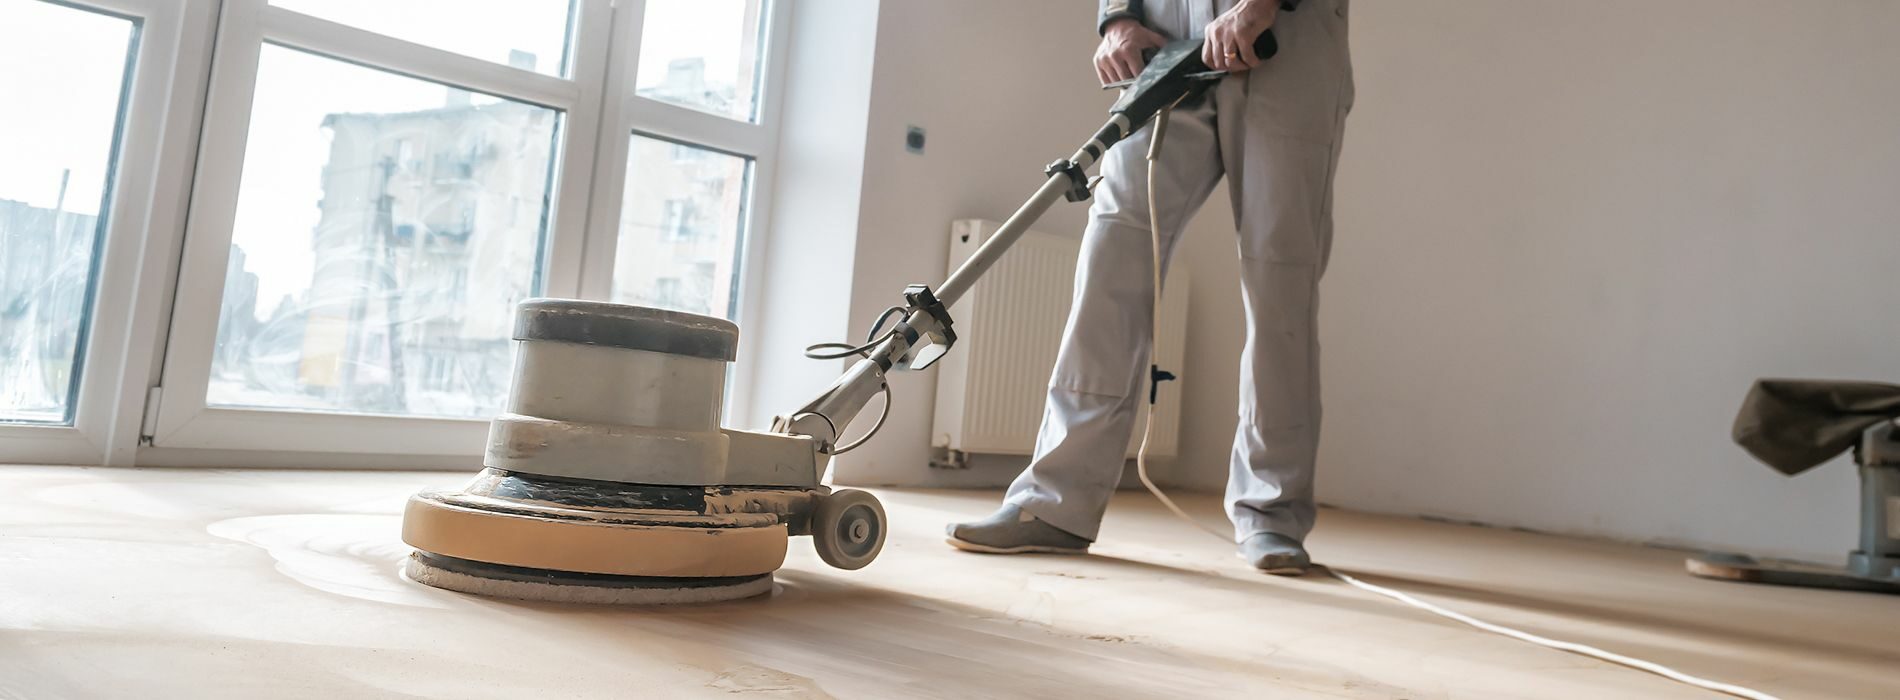 Mr Sander® sanding a herringbone floor with a 178 mm Bona belt sander connected to a dust extraction system. The sander has a diameter of 750mm and employs a HEPA filter for a clean and efficient result. The floorboards have dimensions of 220 mm in length and 130 mm in width. 